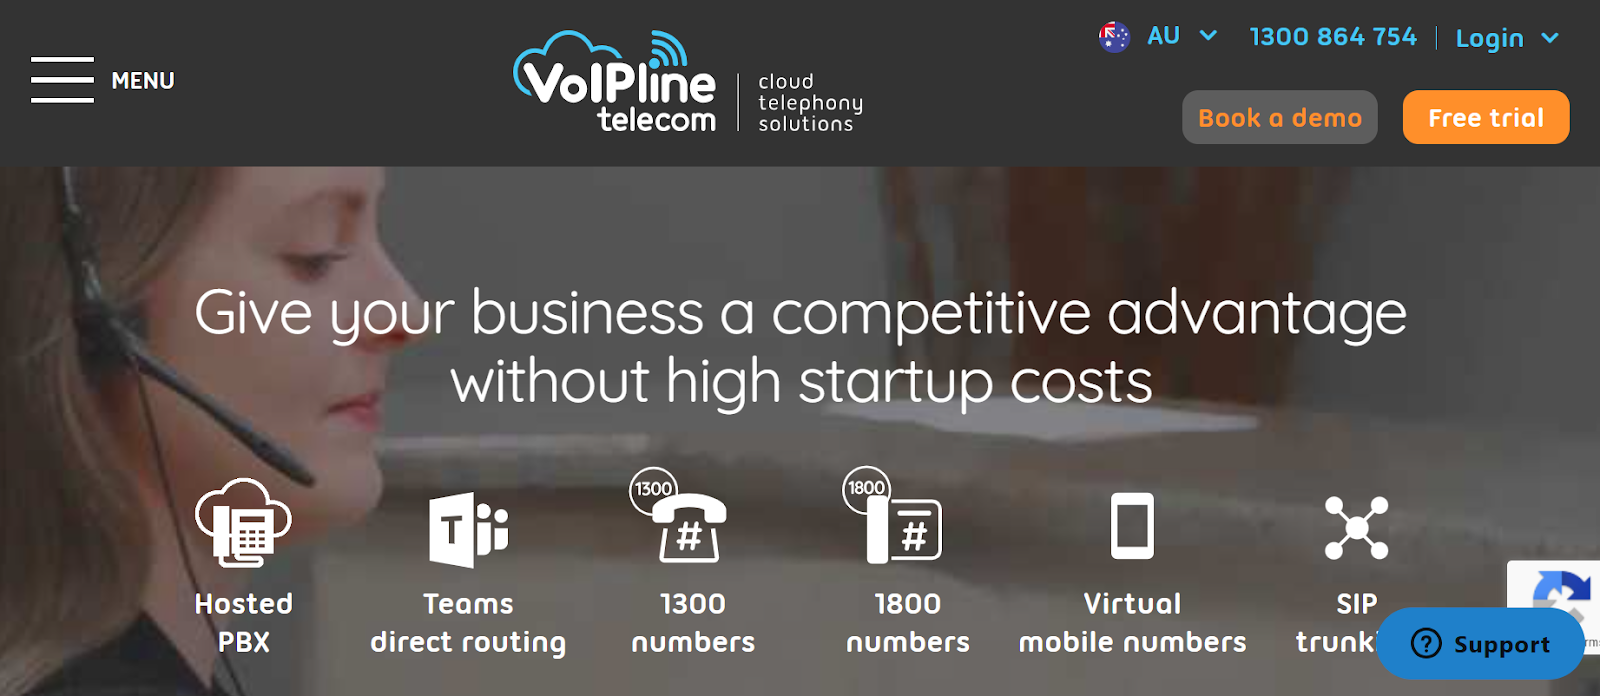 VoIPLine website snapshot highlighting the services it offers.